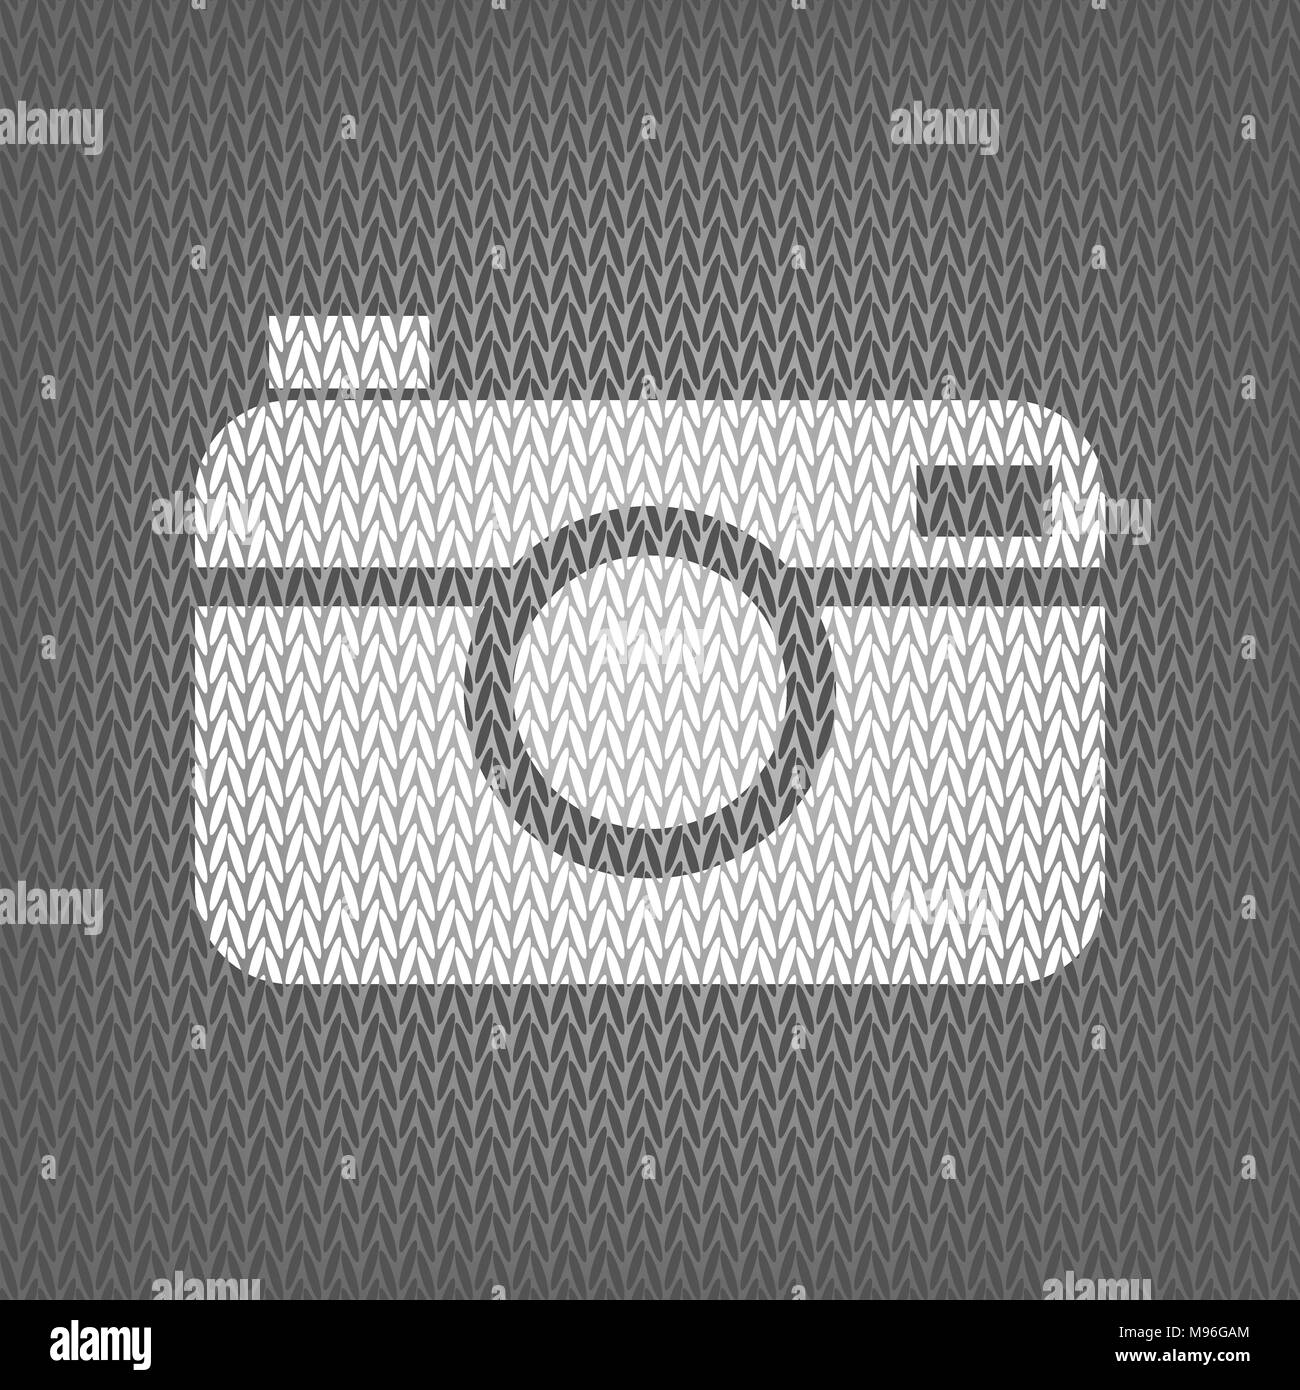 Digital photo camera sign. Vector. White knitted icon on gray knitted background. Isolated. Stock Vector